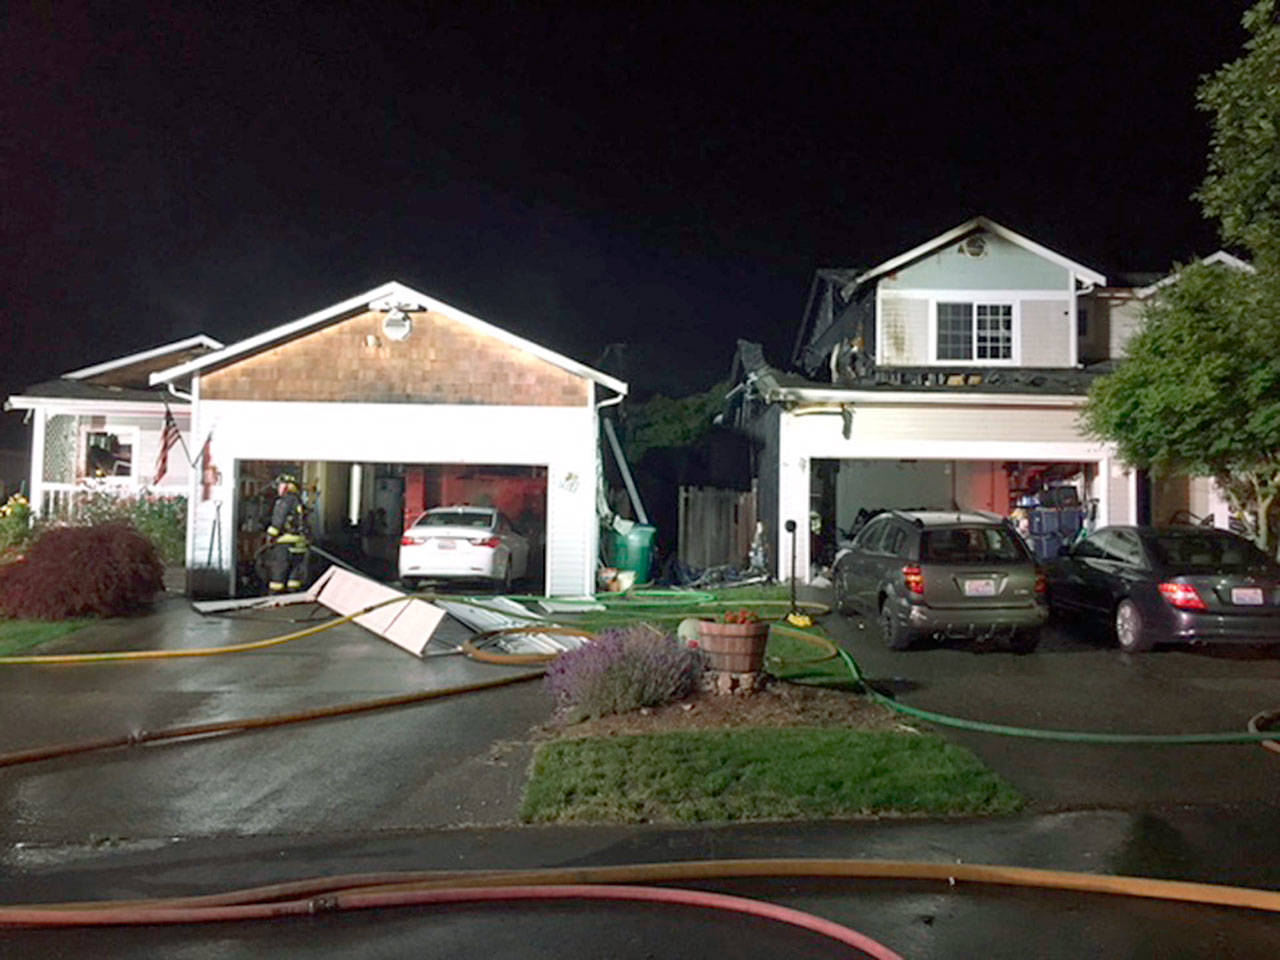 Fireworks were the suspected cause of a fire that damaged two homes in Lake Stevens last year around July 4. (Lake Stevens Fire District)